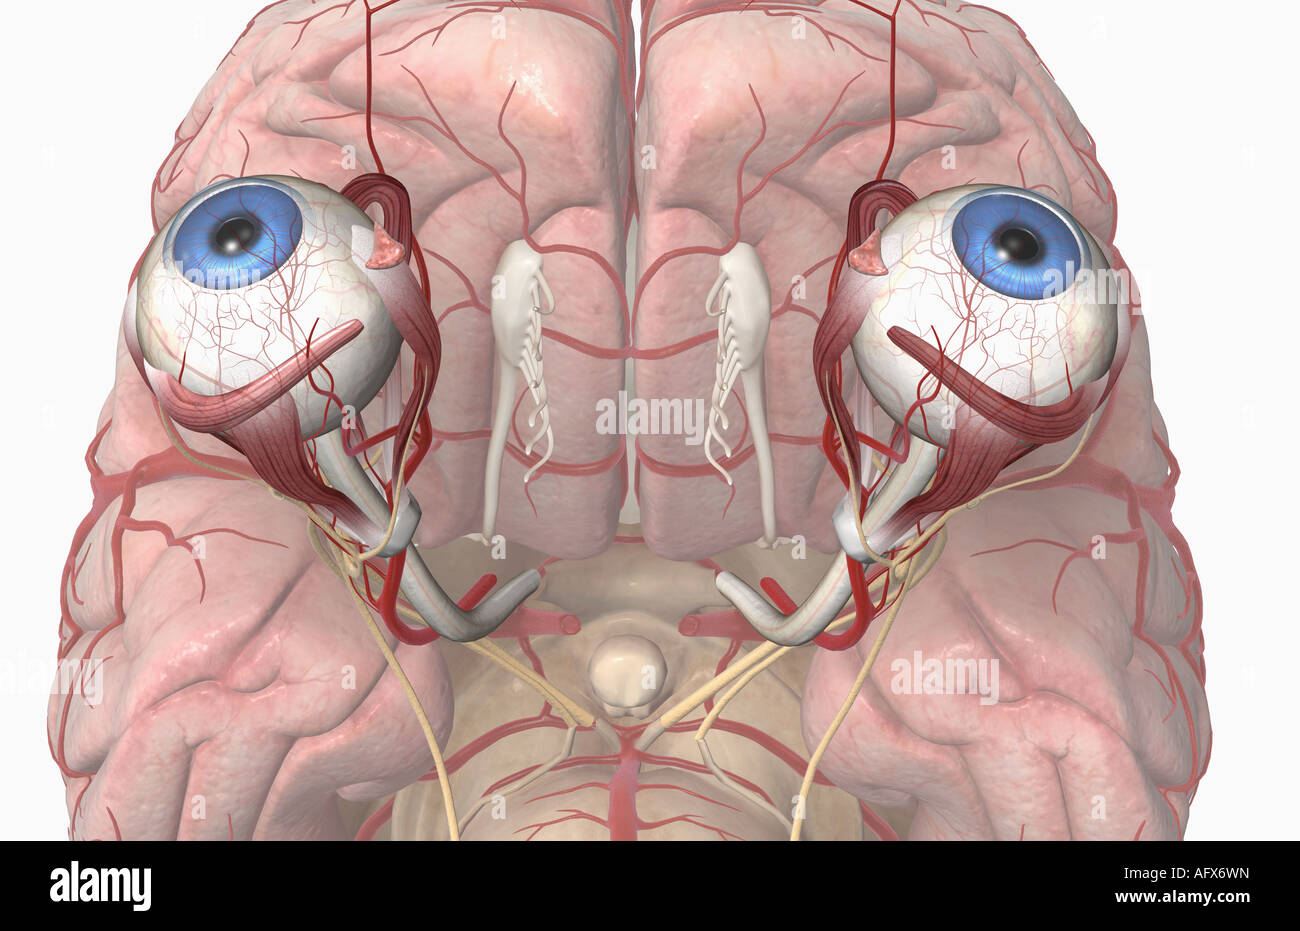 The arteries of the brain and eyes Stock Photo